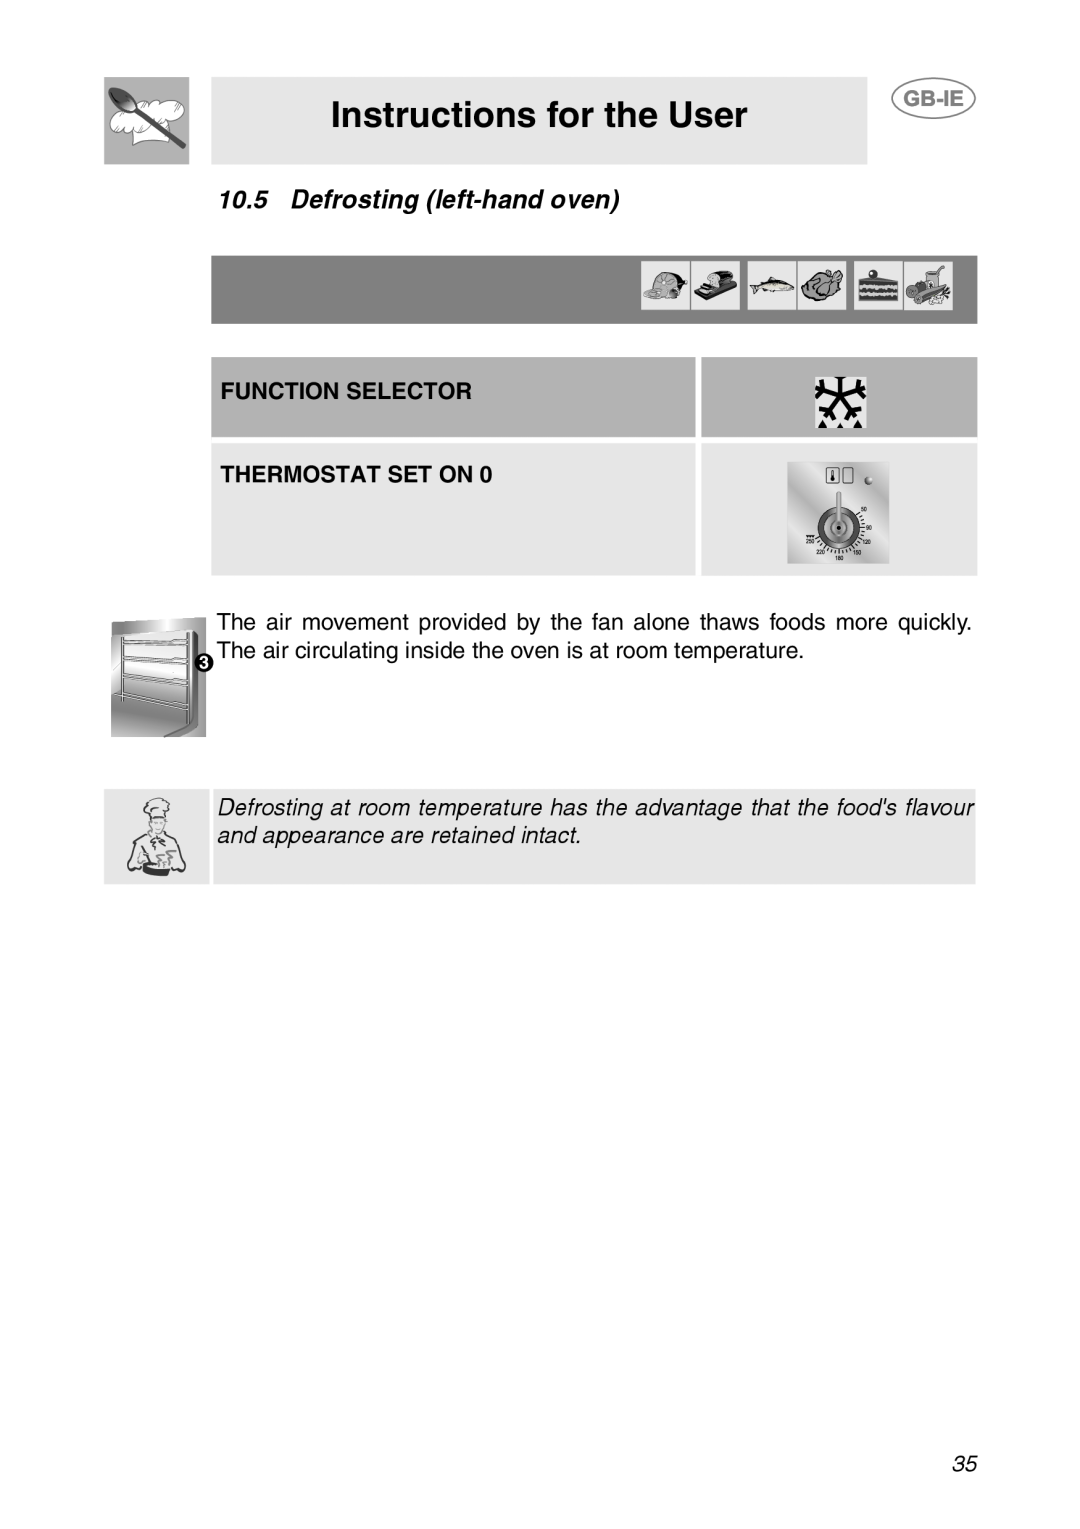 Smeg CS150SA manual Instructions for the User, Defrosting left-handoven, Function Selector Thermostat Set On 